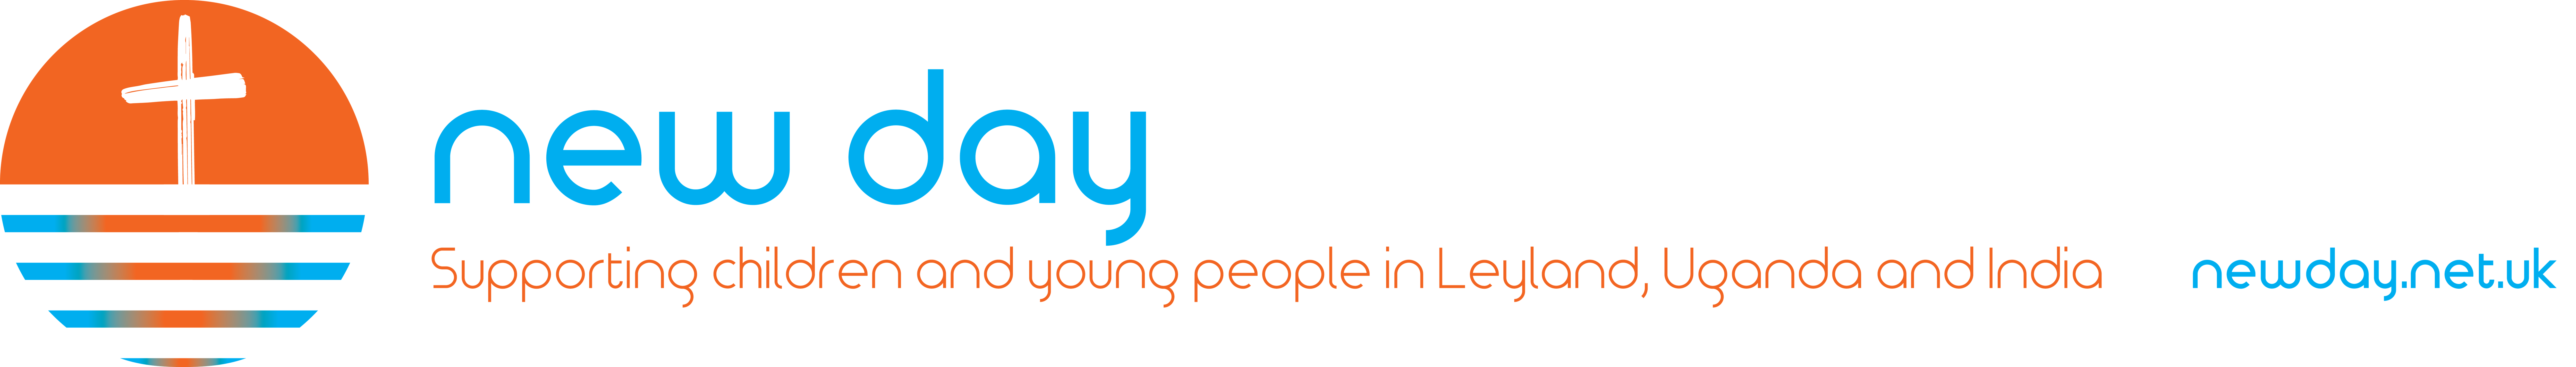 New Day Homes of Hope Charity Shop